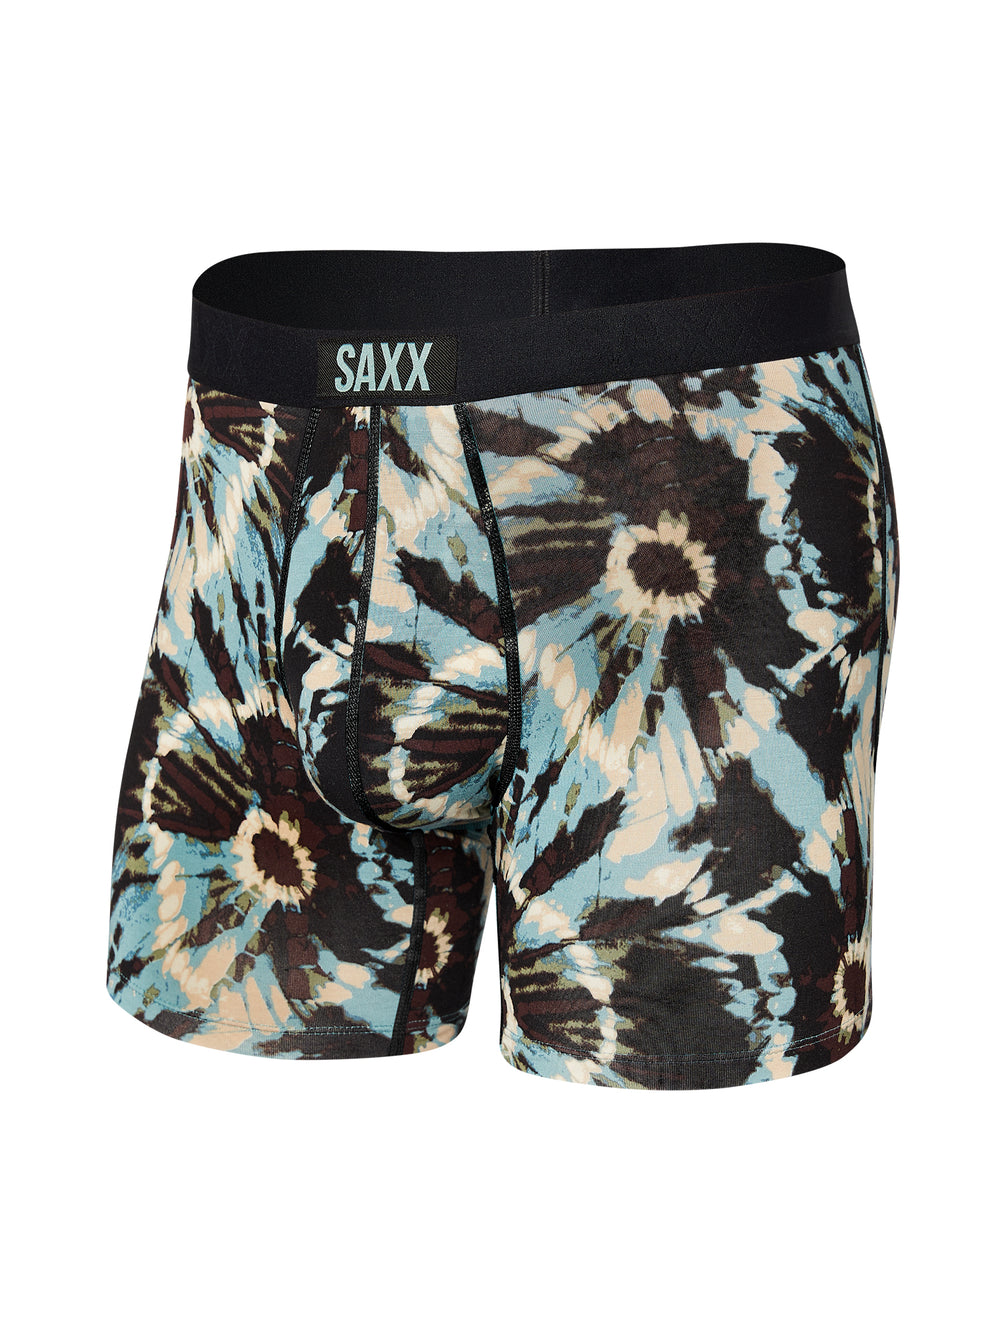 SAXX VIBE BOXER BRIEF - EARTHY TIE DYE - CLEARANCE